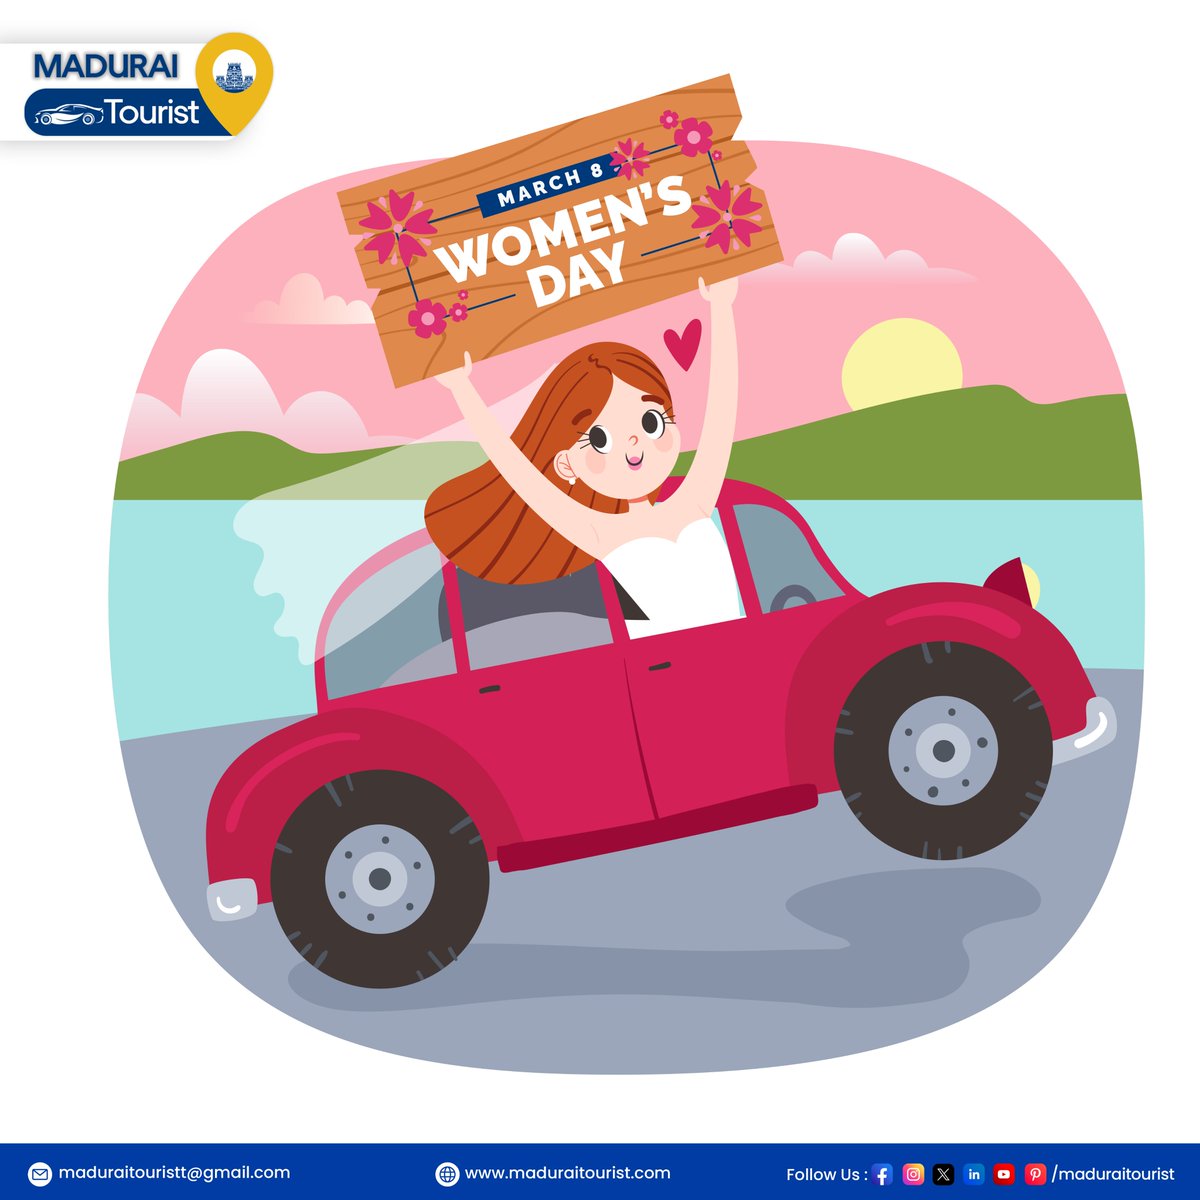 🌸 Happy Women's Day Greetings From @maduraitourist 🌸 Today, we celebrate the incredible achievements, contributions, and strength of women all around the world. #MaduraiTourist #MaduraiTouristcelebration #womensday2024 #happywomensday2024 #WomensDayCelebration #EmpowerWomen